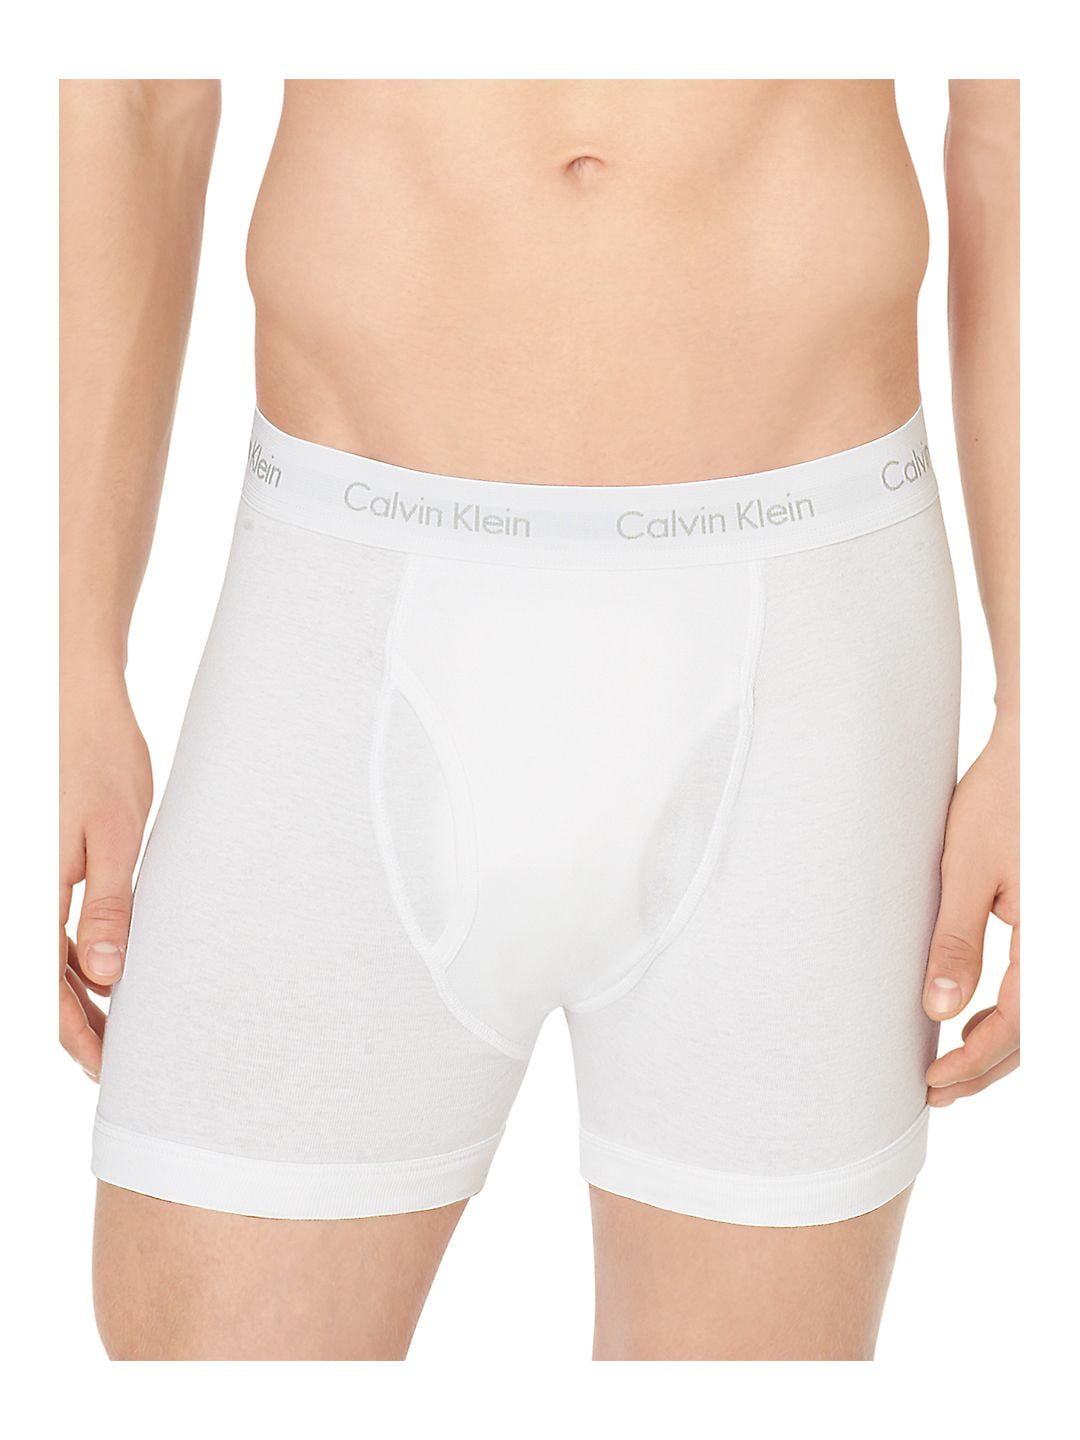 Calvin Klein Cotton Classics Boxer Briefs 3-Pack White NU3019-100 - Free  Shipping at LASC